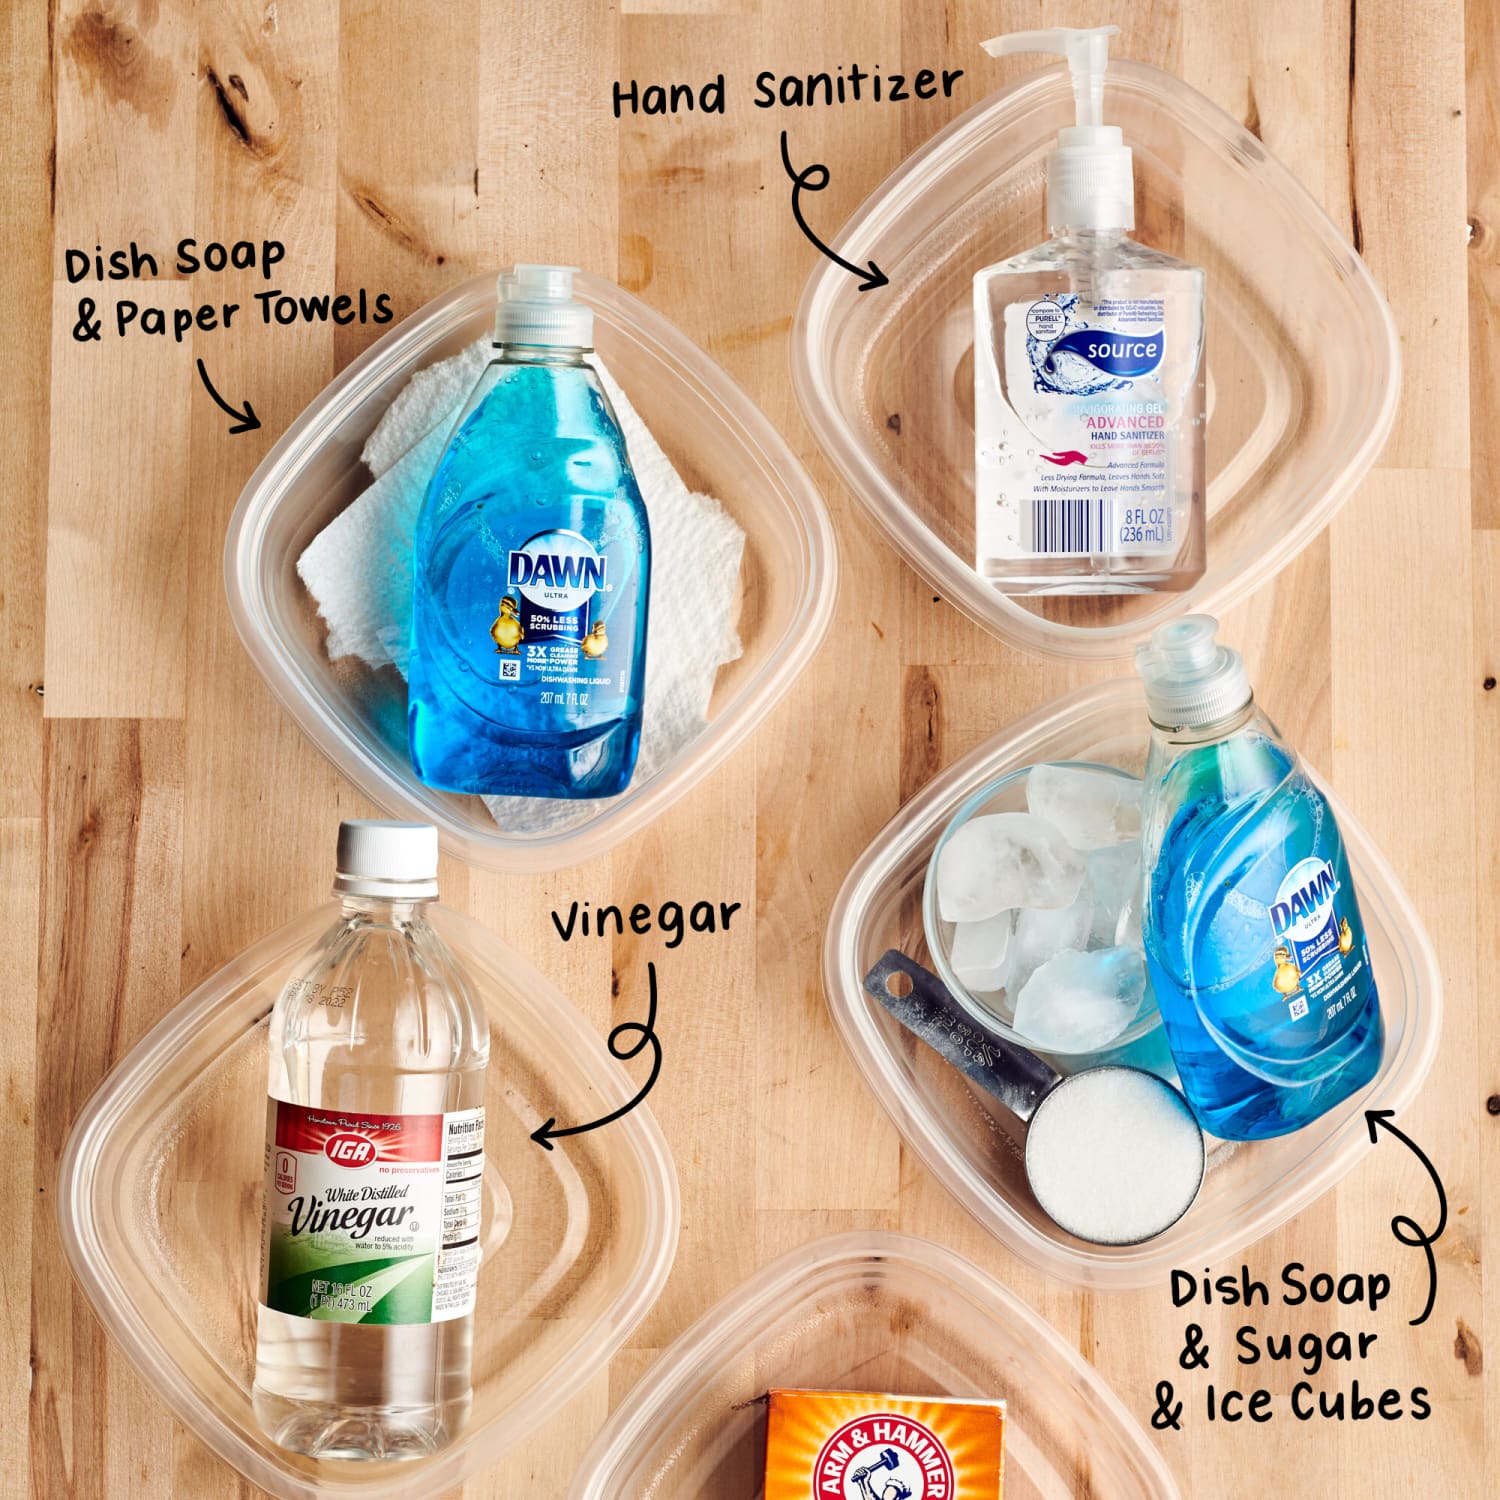 How to Remove Stains from Plastic Containers